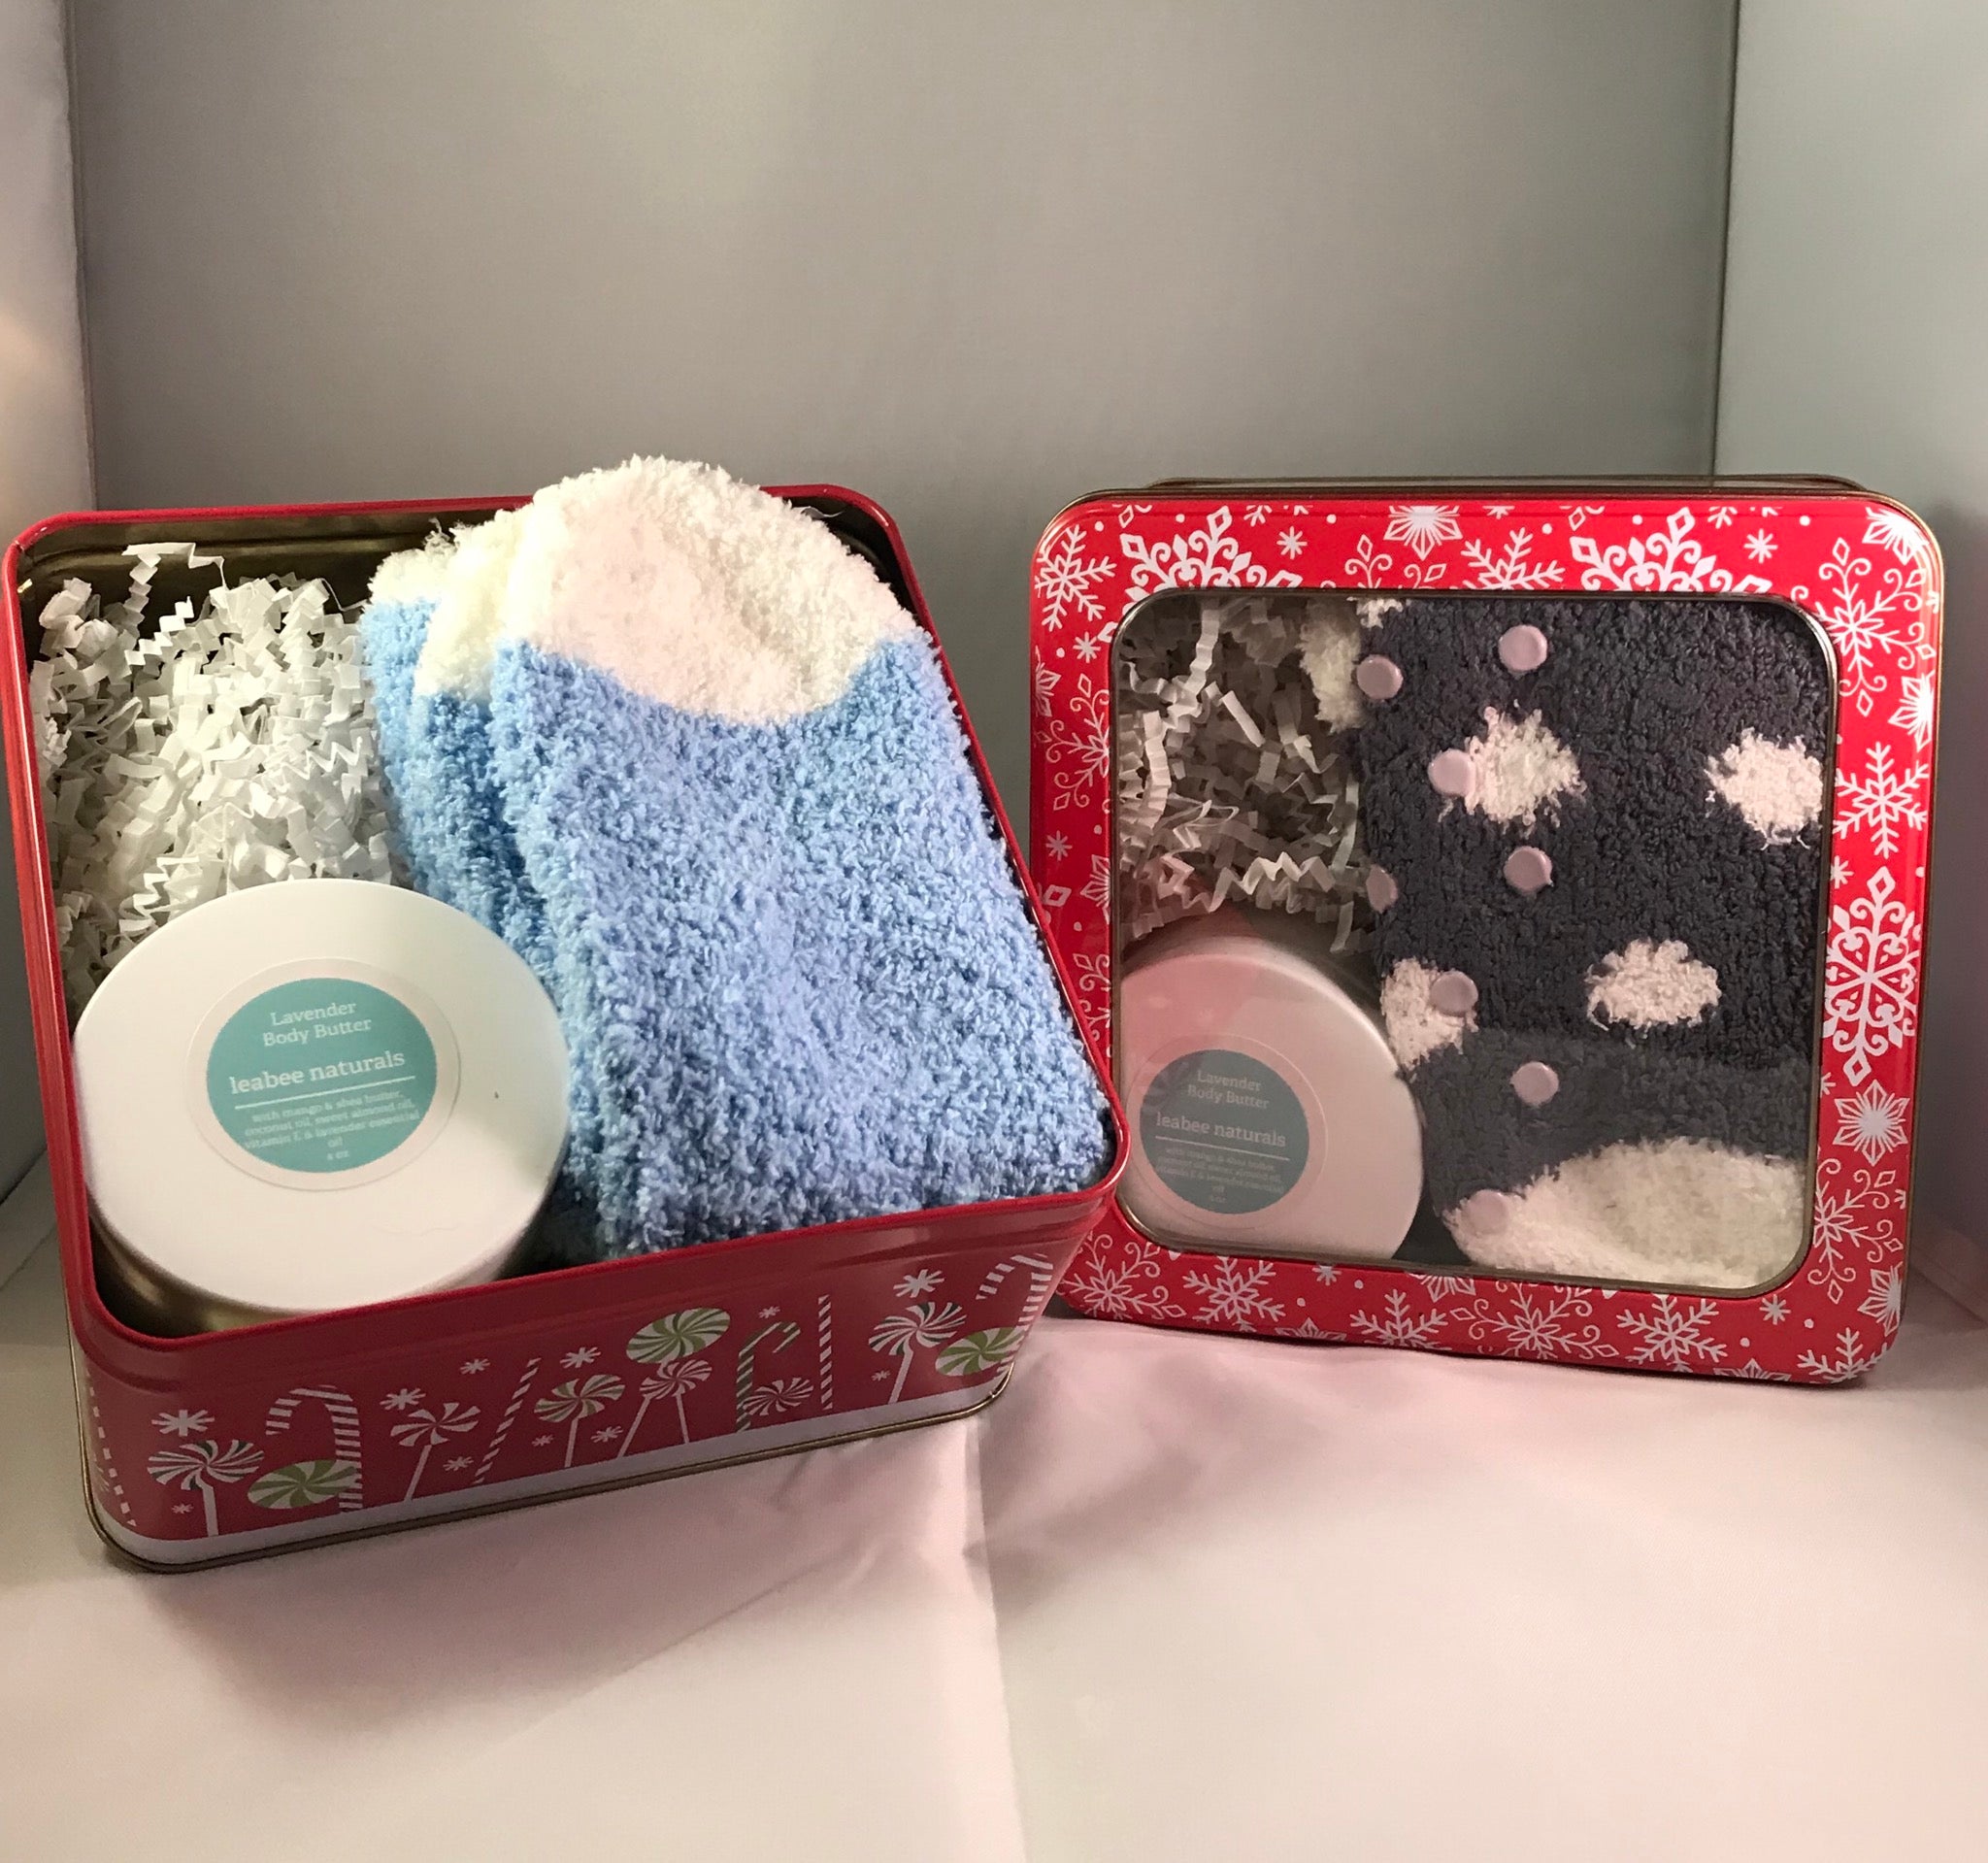 LeaBee’s Pamper Me Gift Set